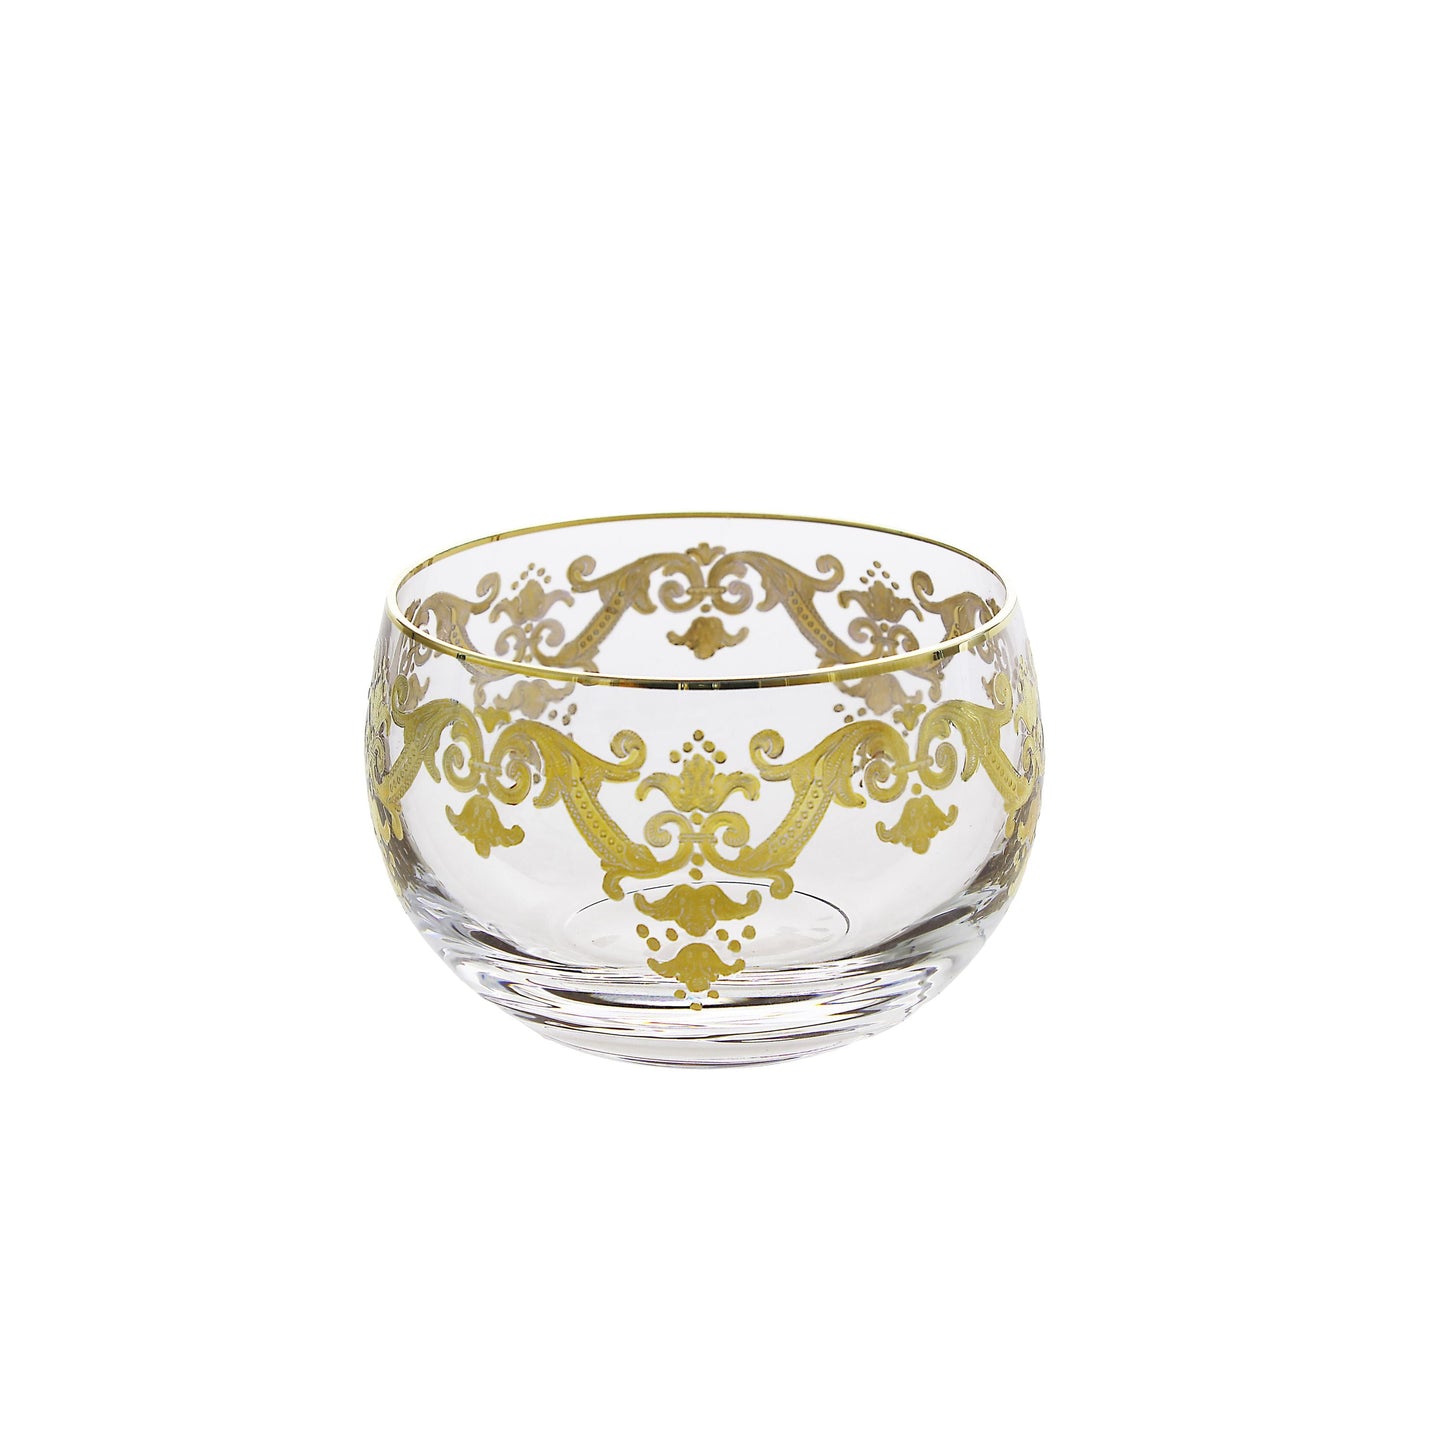 Classic Touch Decor Small Glass Bowl with 24K Gold Artwork, 3.5"